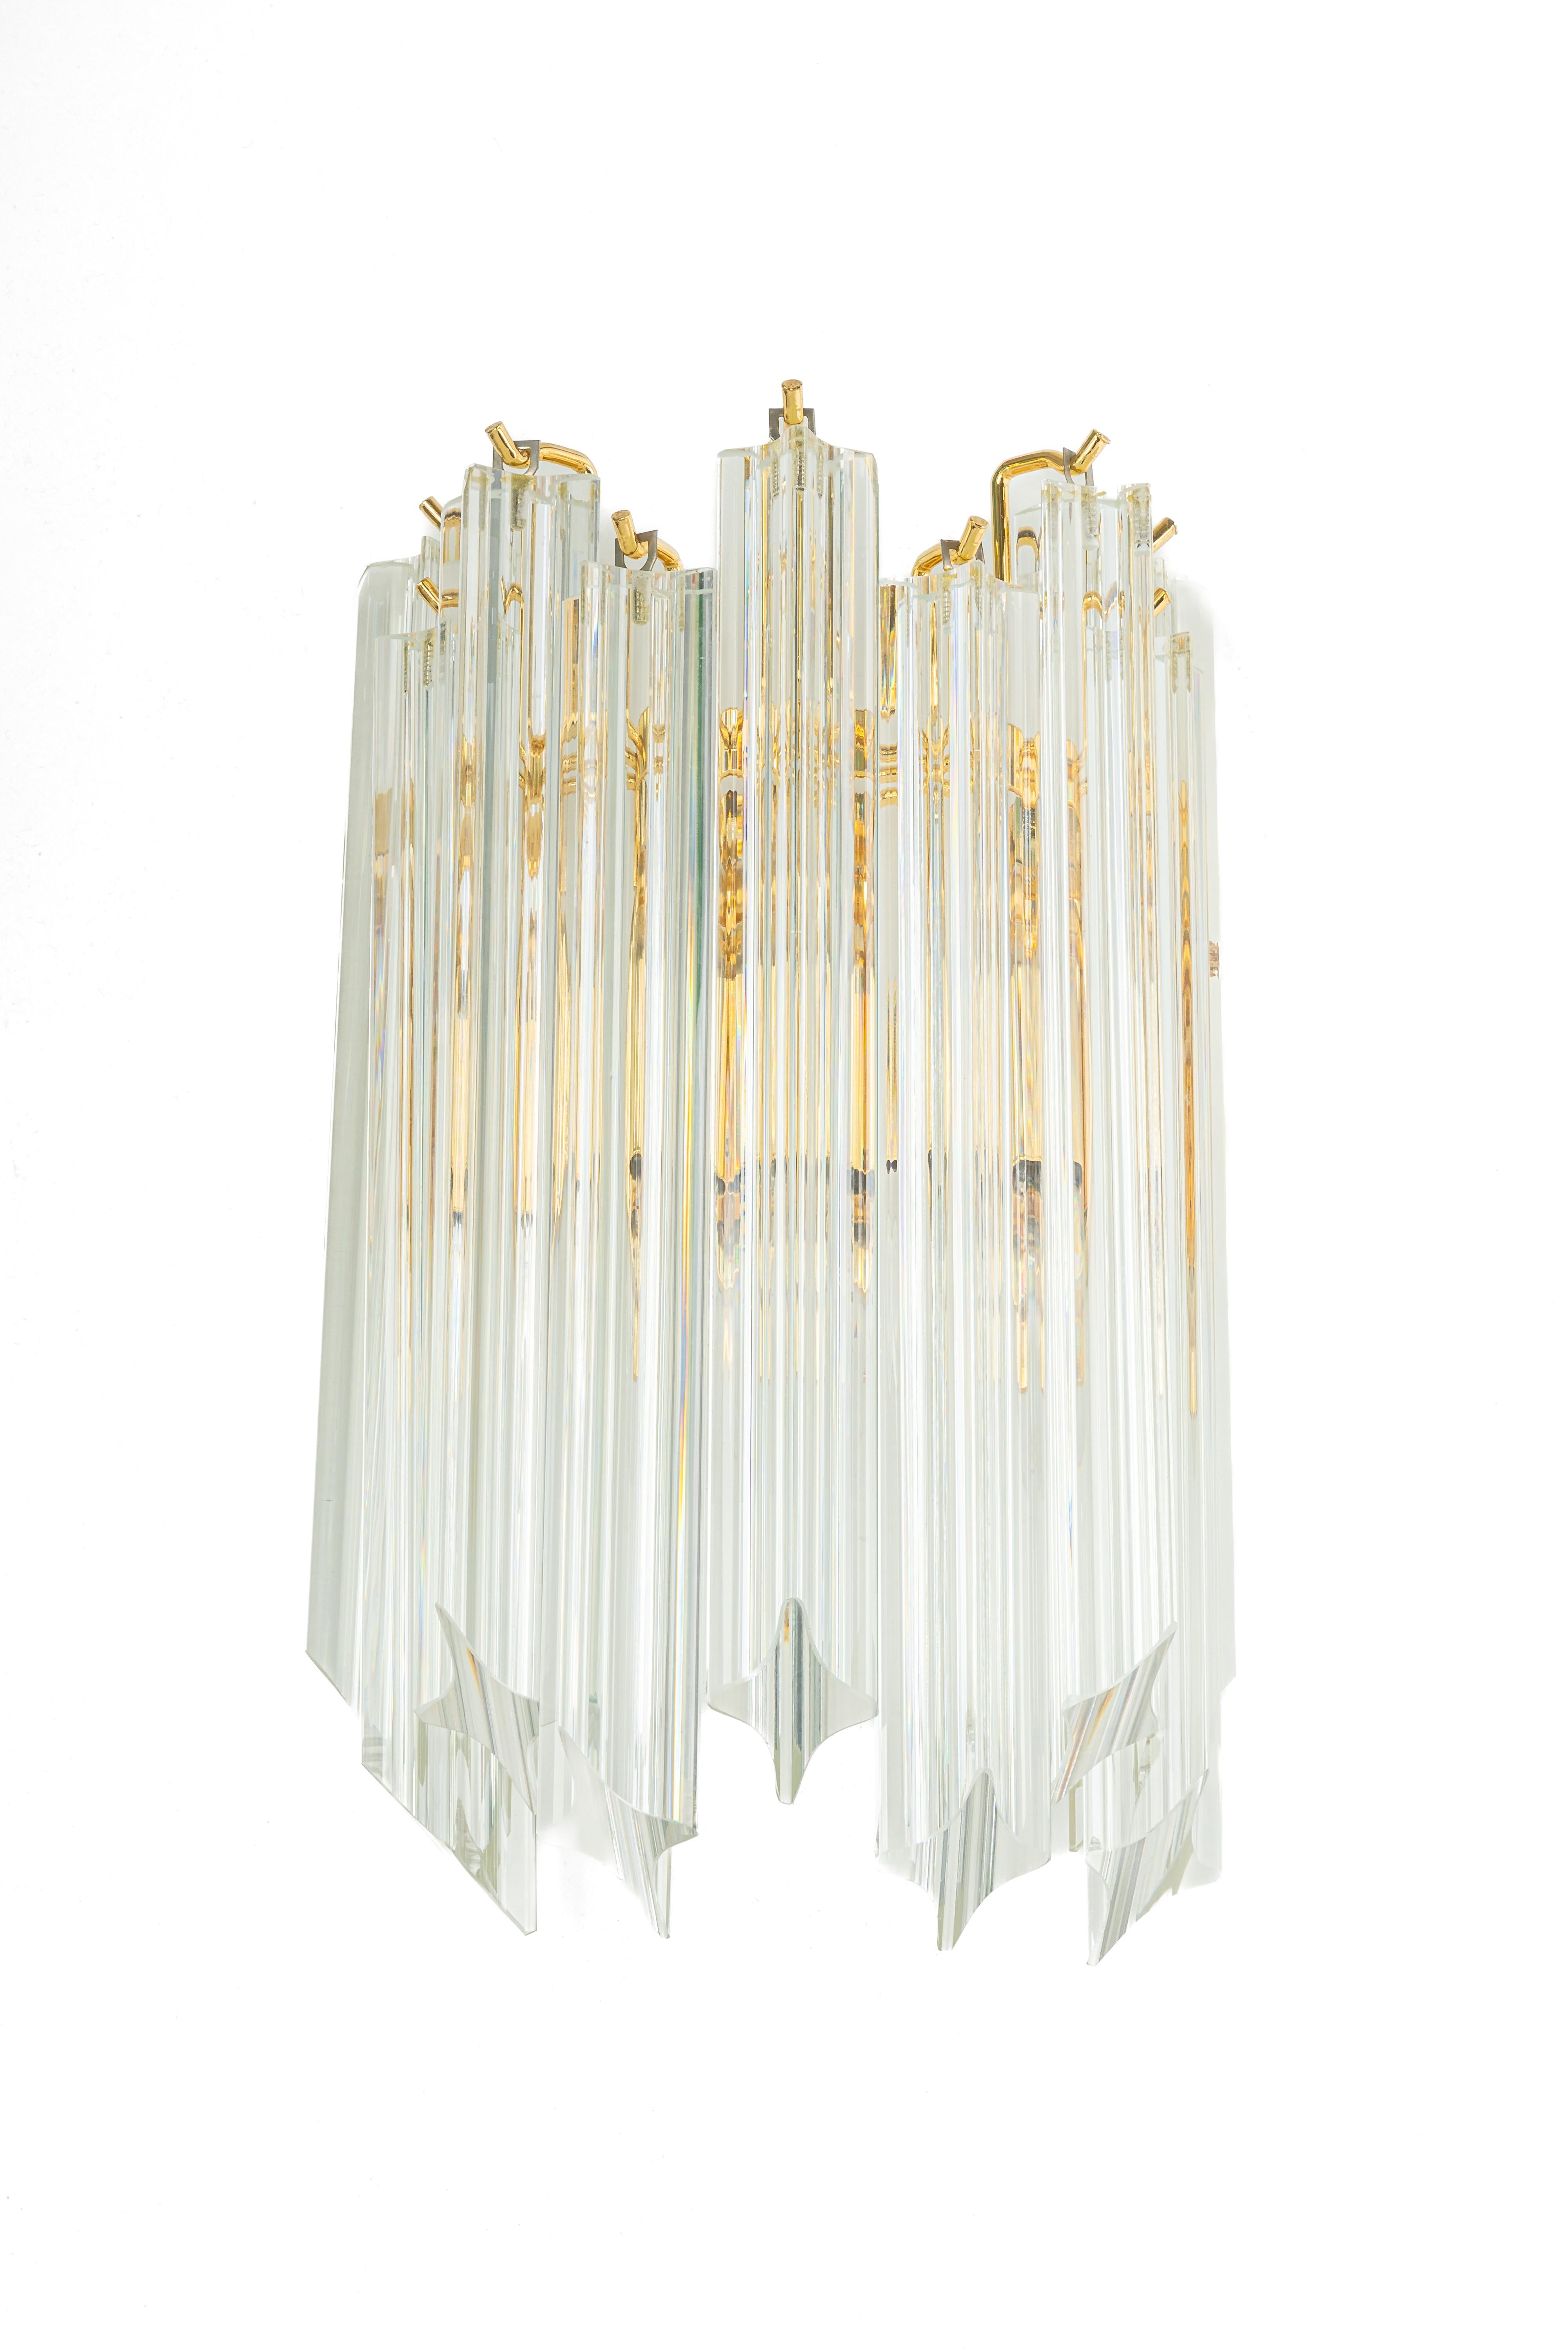 1 of 3 Crystal Glass Wall Lights in Venini Style, Italy, 1980s For Sale 1